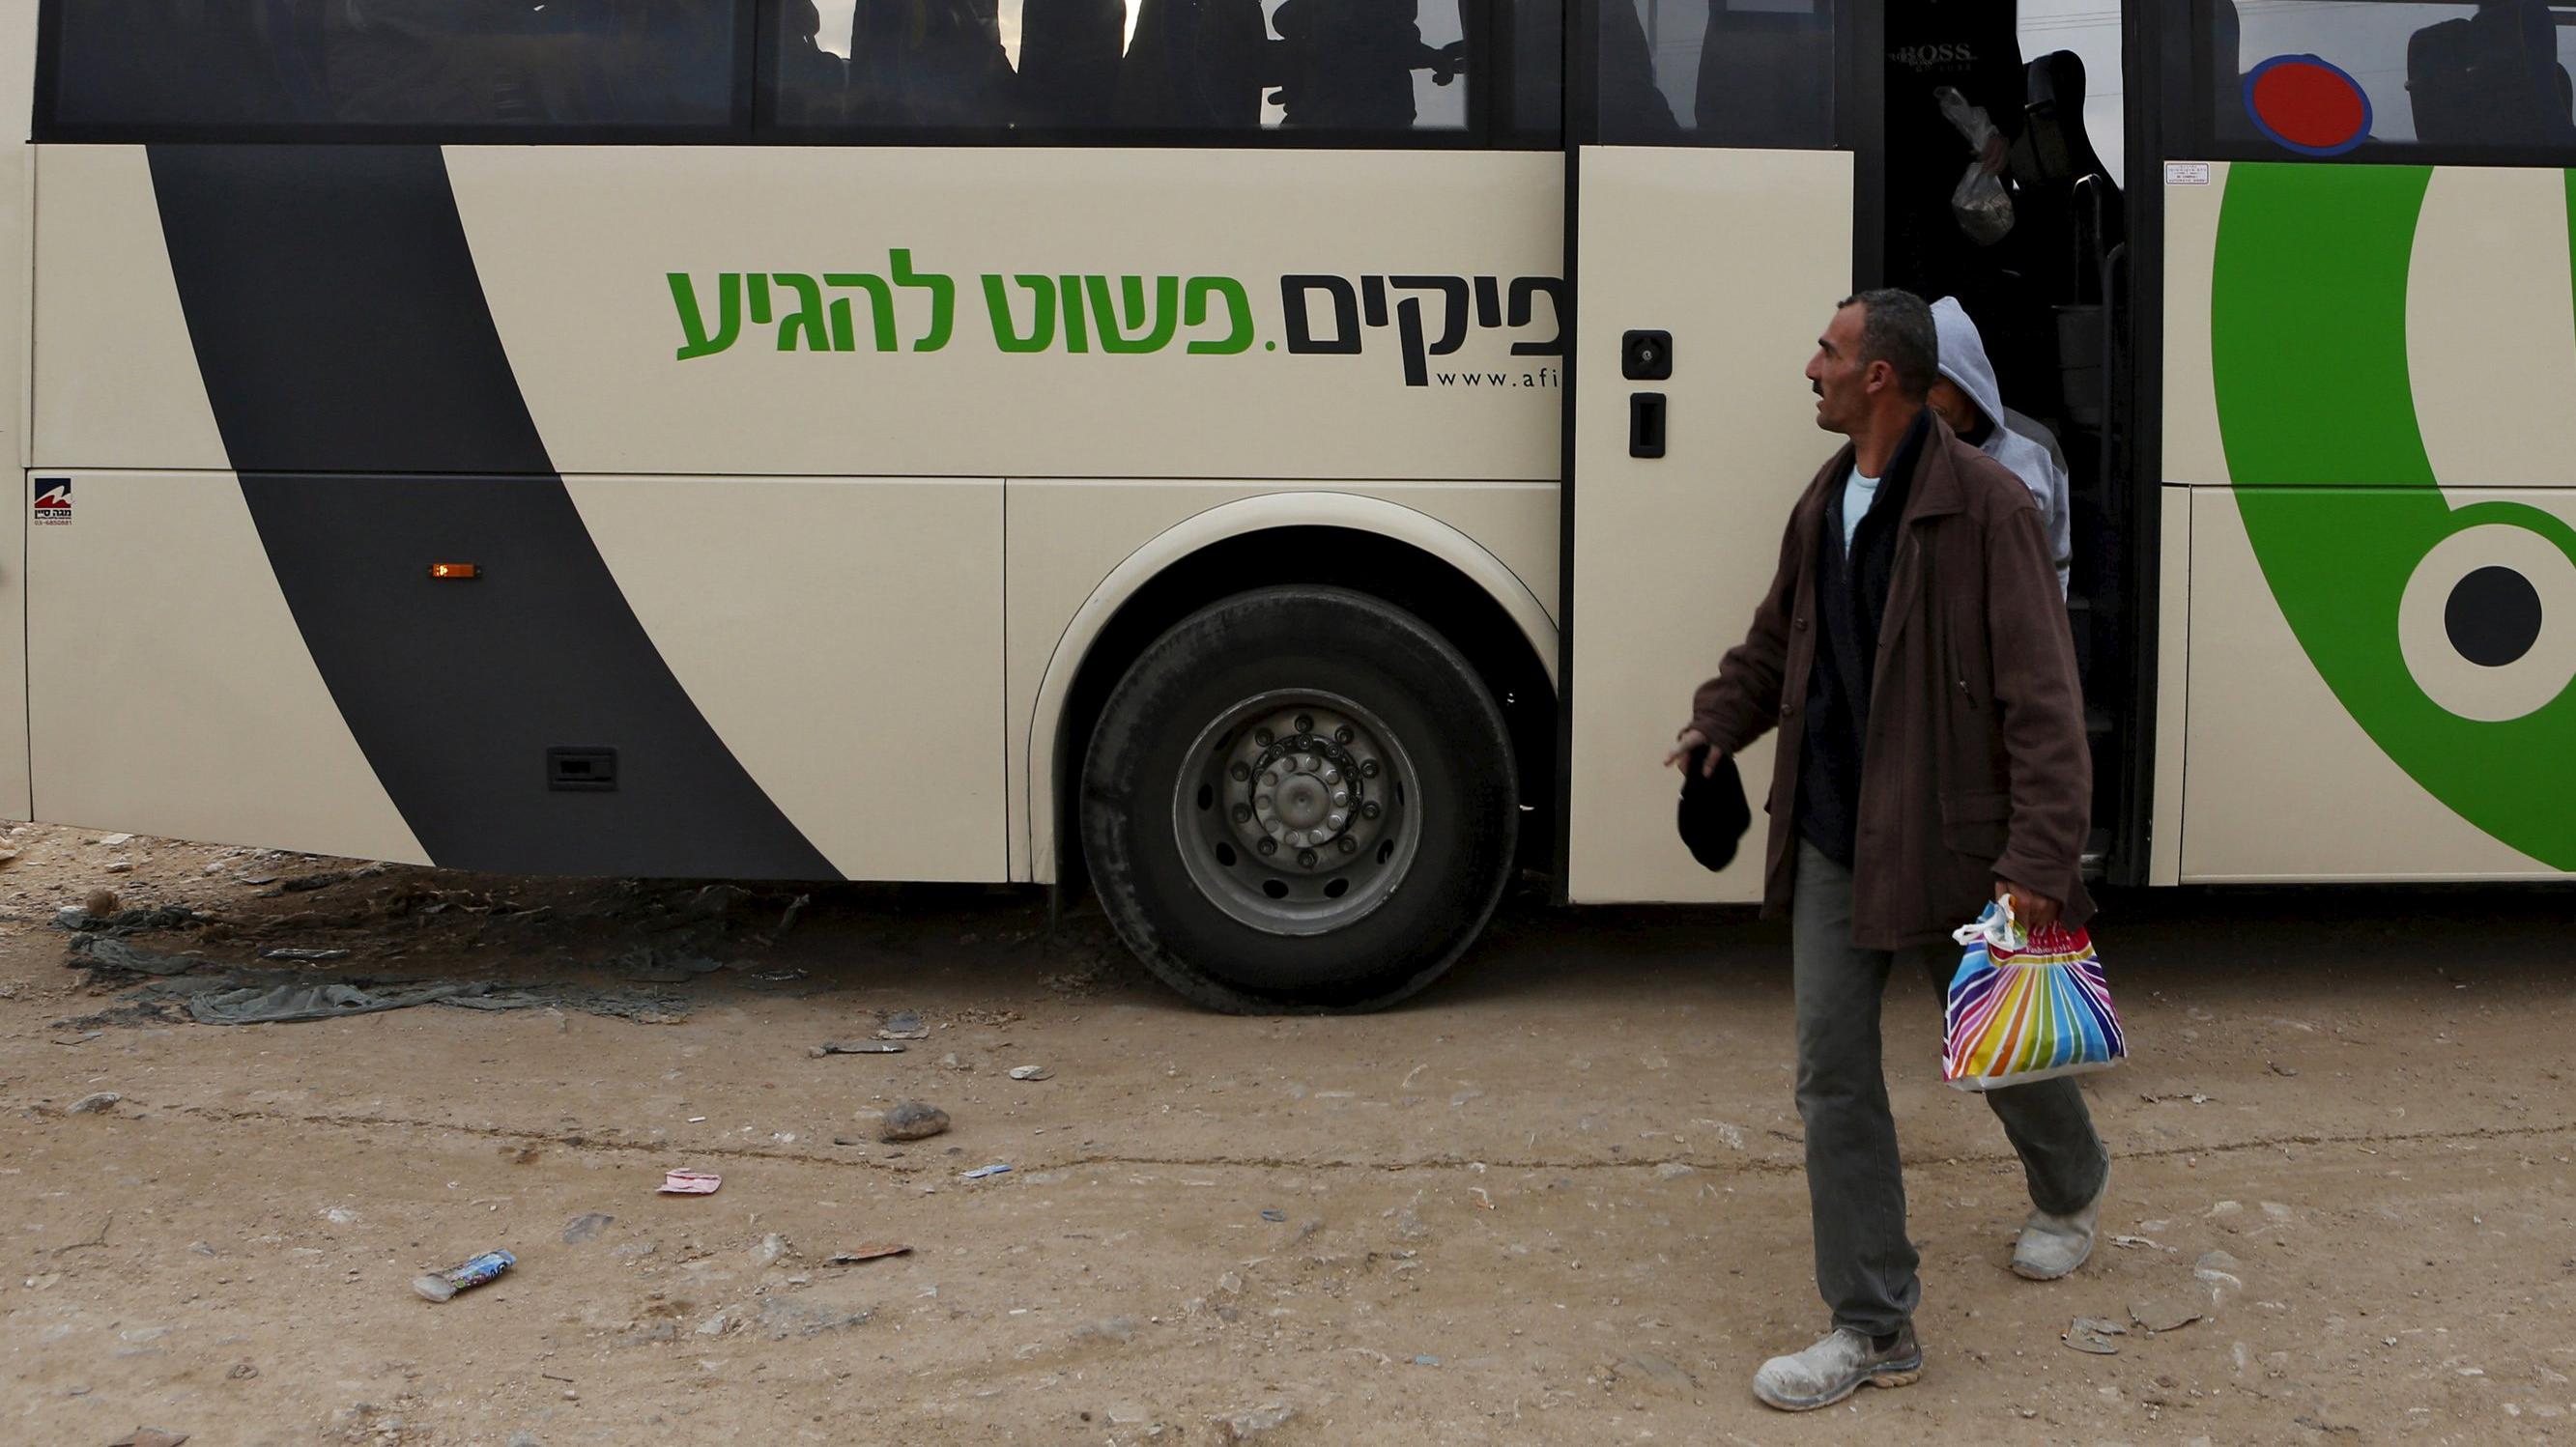 Prime Minister Benjamin Netanyahu suspended on Wednesday new bus travel and checkpoint regulations for Palestinian laborers only hours after they were imposed.